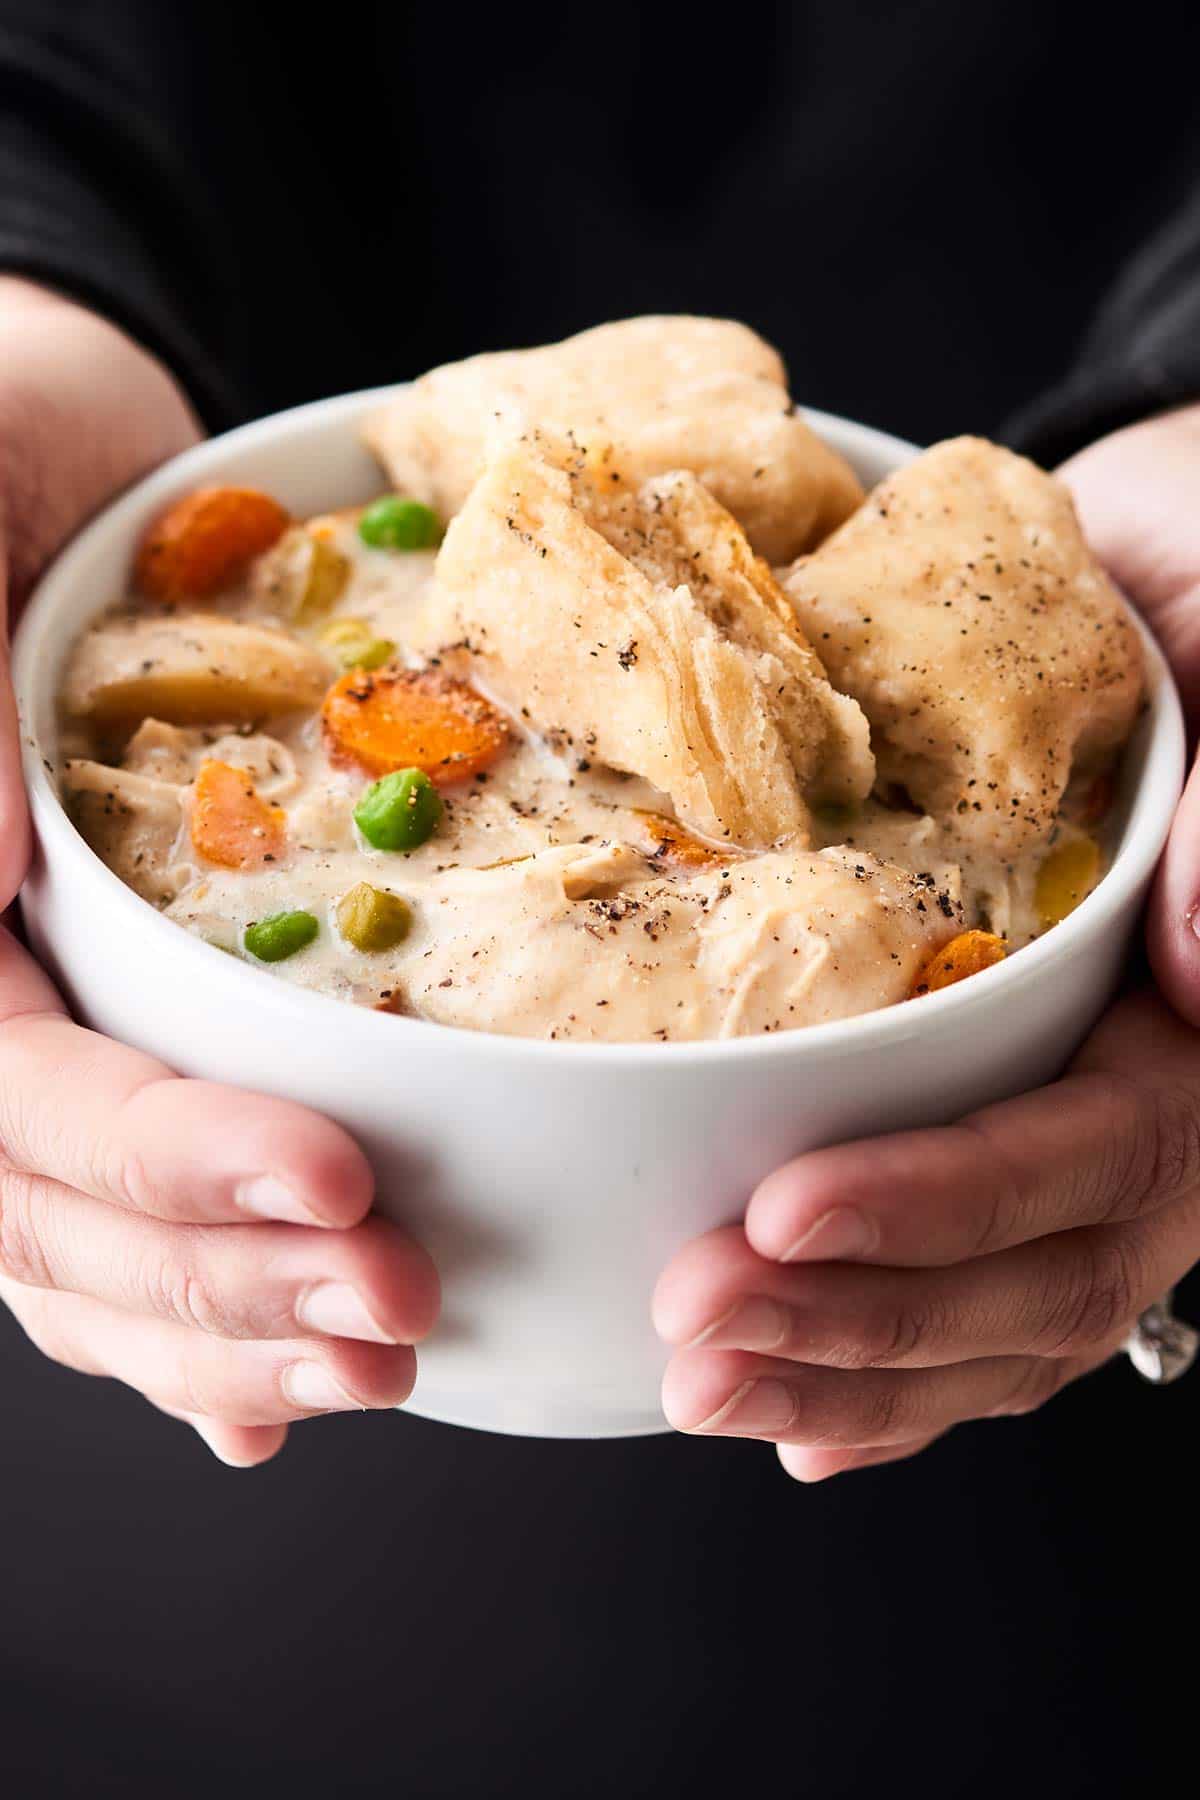 Crockpot Chicken and Dumplings. Winter comfort food! Quick & easy, SO hearty and cozy! Uses refrigerated biscuit dough! No Cream of X Soup! showmetheyummy.com #crockpot #chicken #dumplings